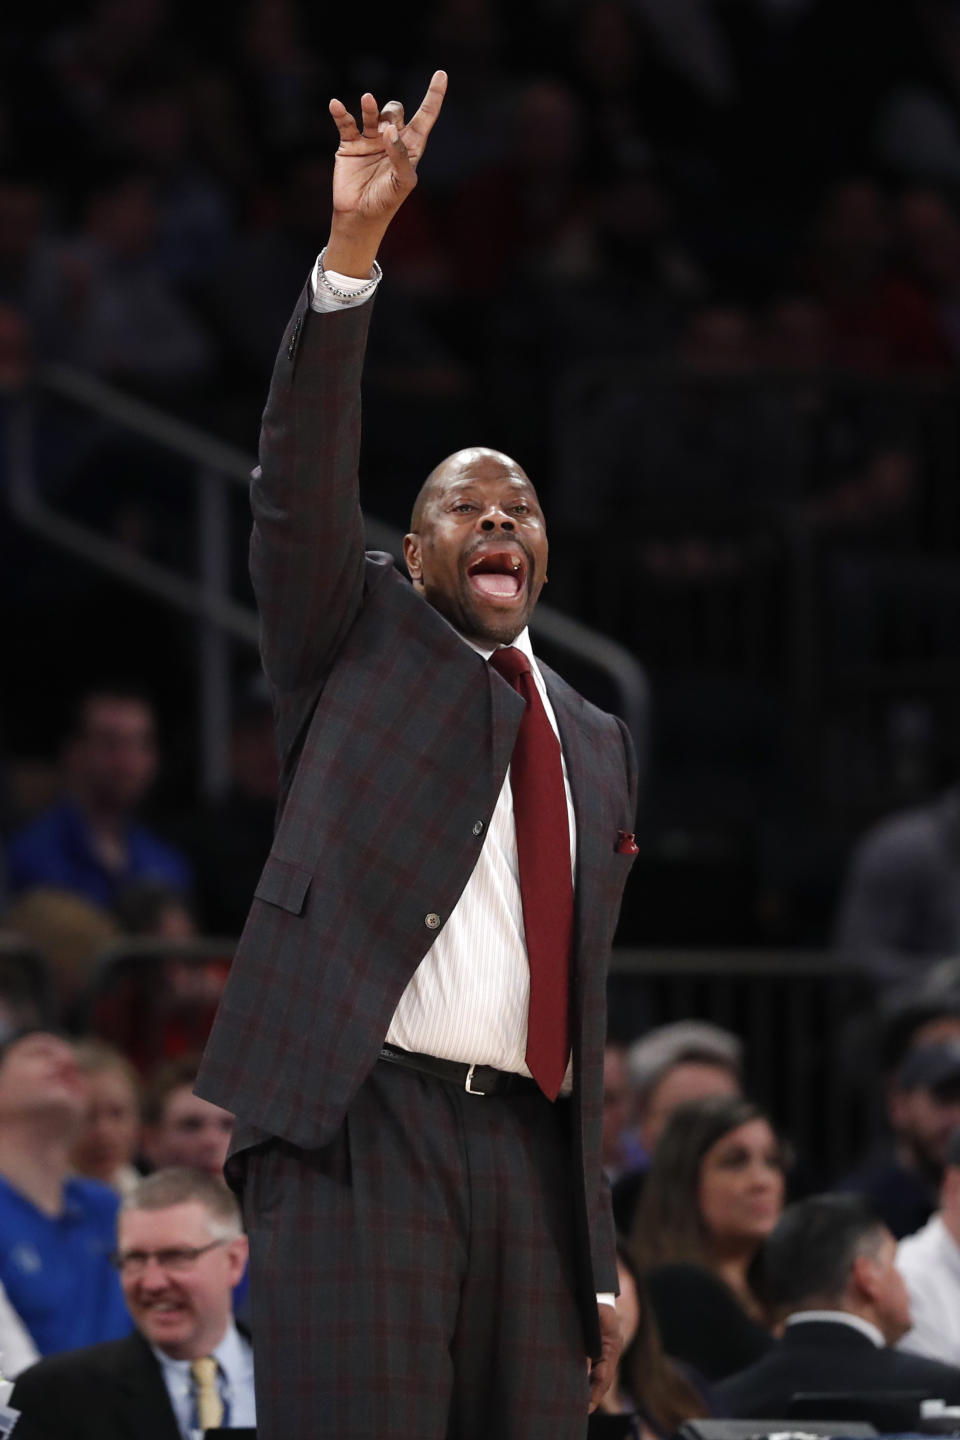 Georgetown coach Patrick Ewing gestures to his players during the second half of the team's NCAA college basketball game against St. John's in the first round of the Big East men's tournament Wednesday, March 11, 2020, in New York. (AP Photo/Kathy Willens)